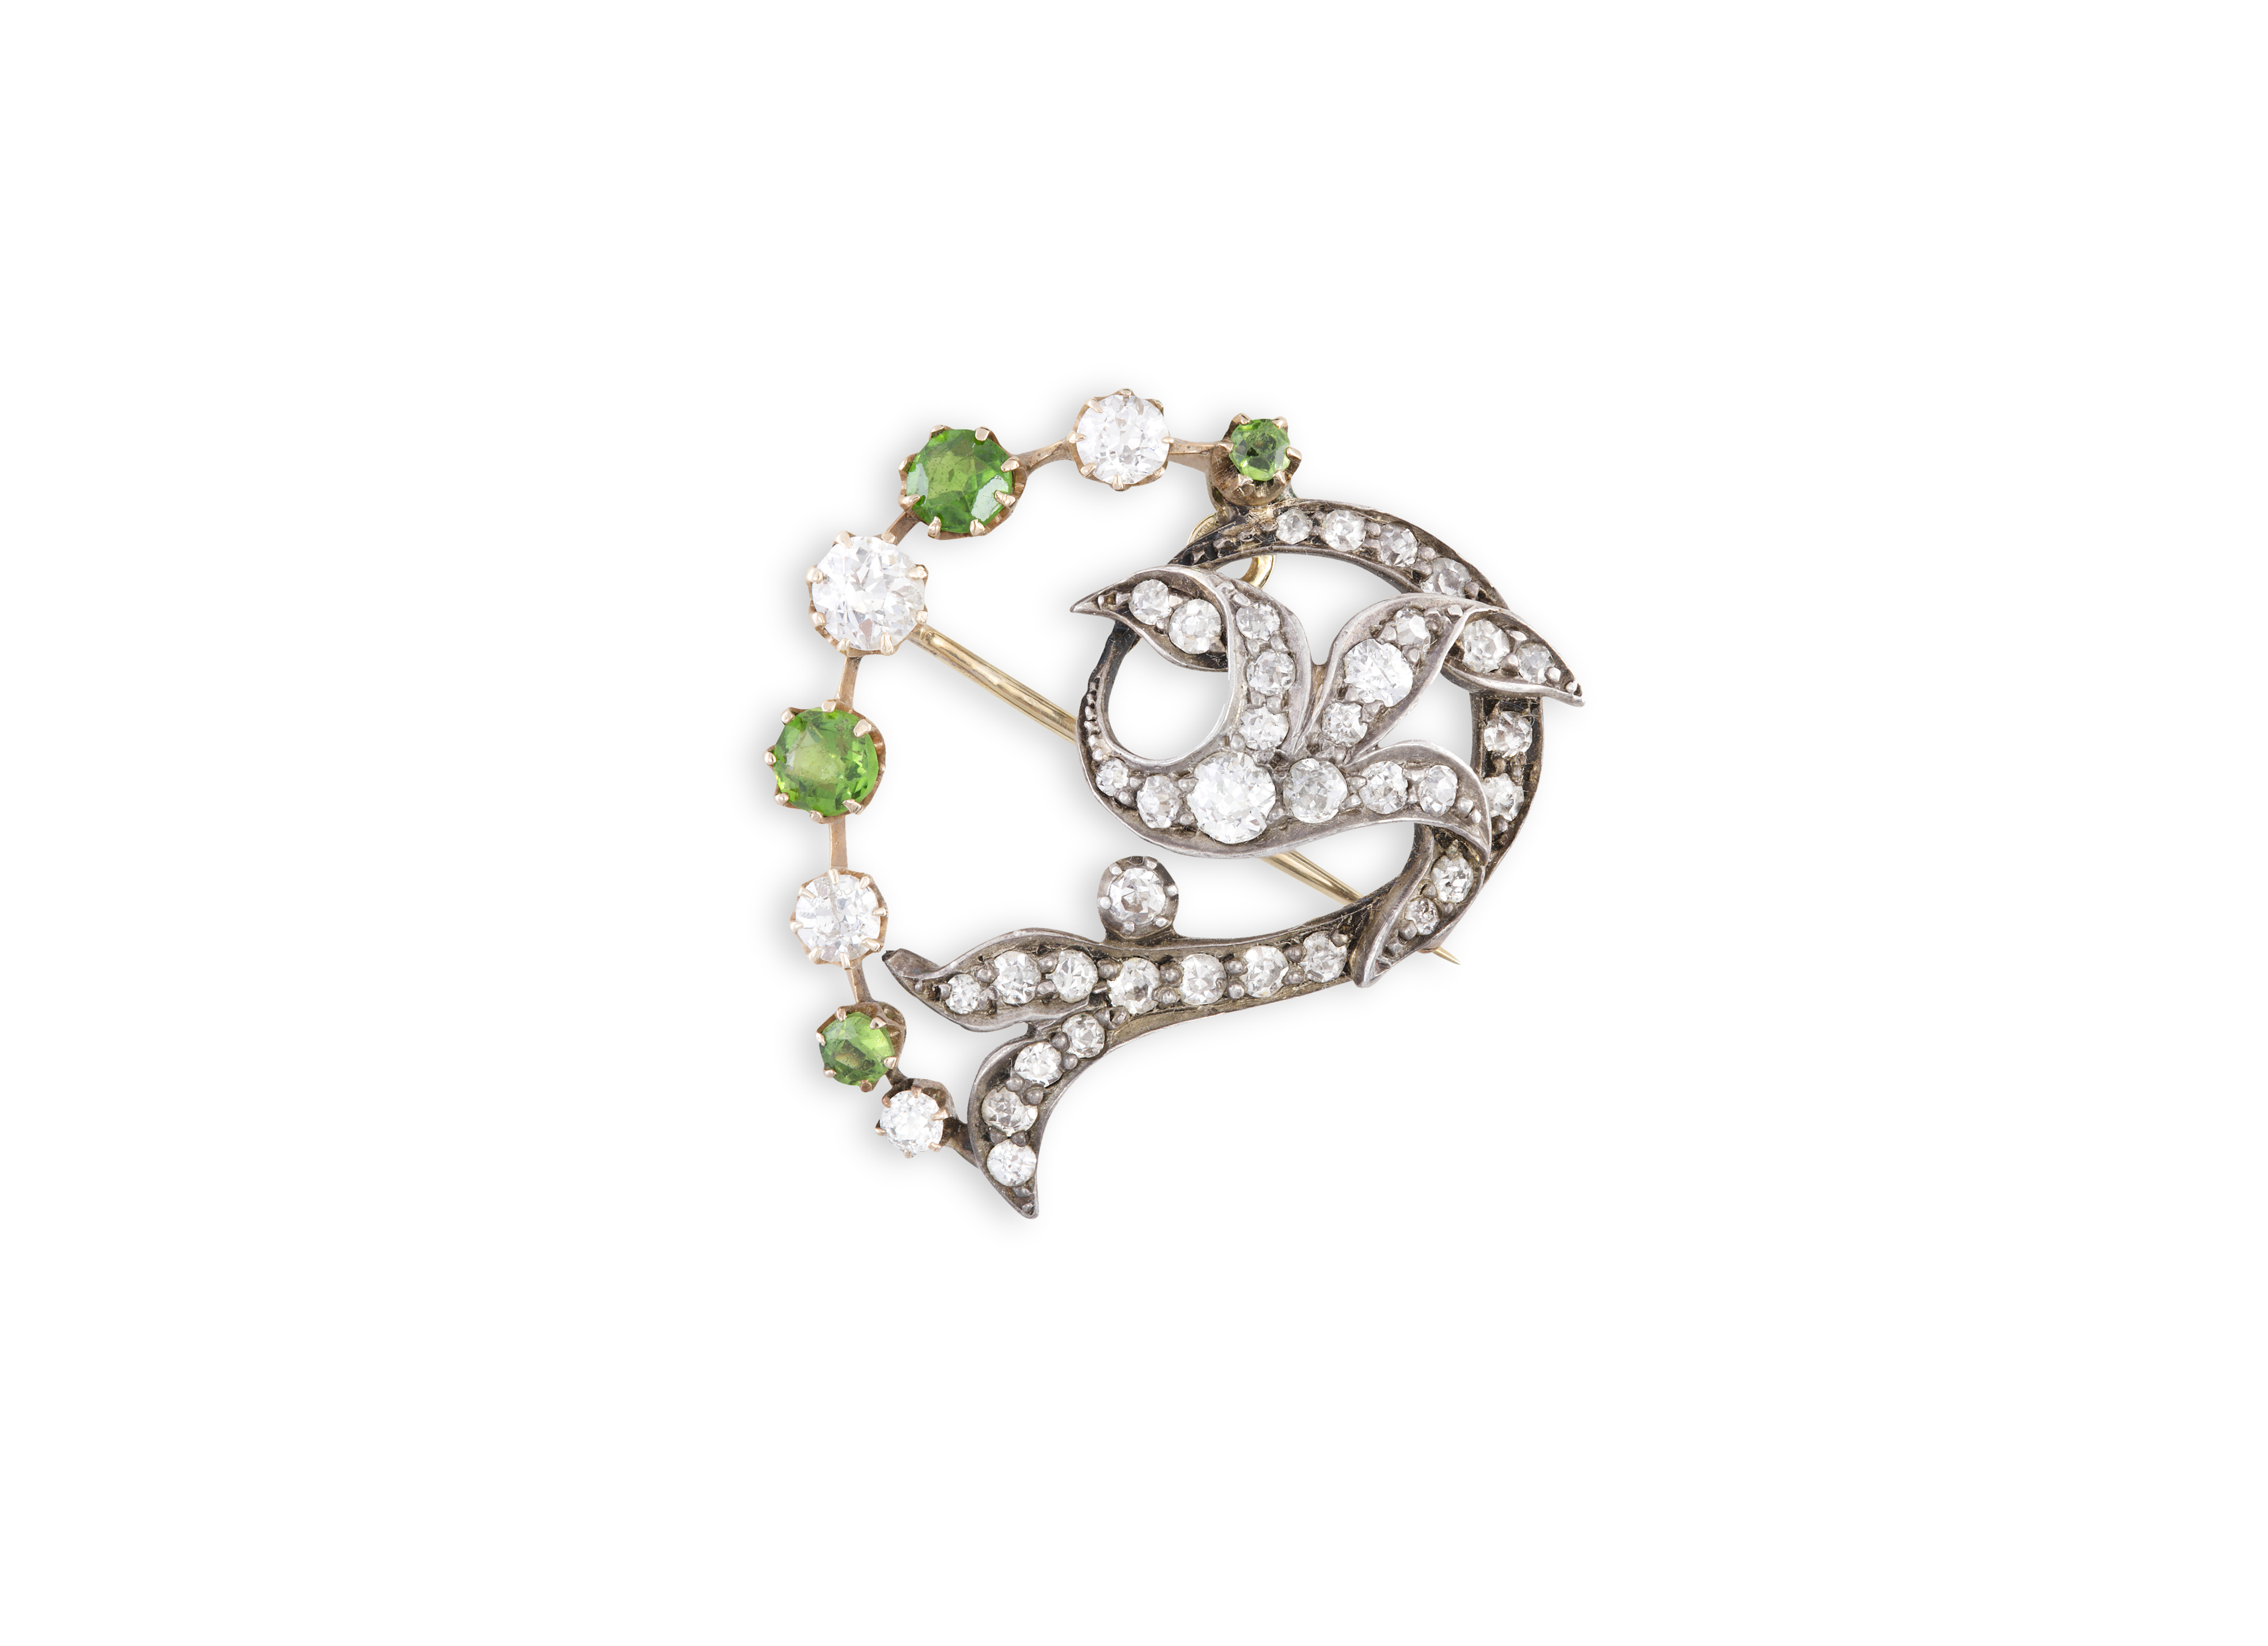 A VICTORIAN DIAMOND AND PERIDOT BROOCH, mounted in silver and gold, length 3cm